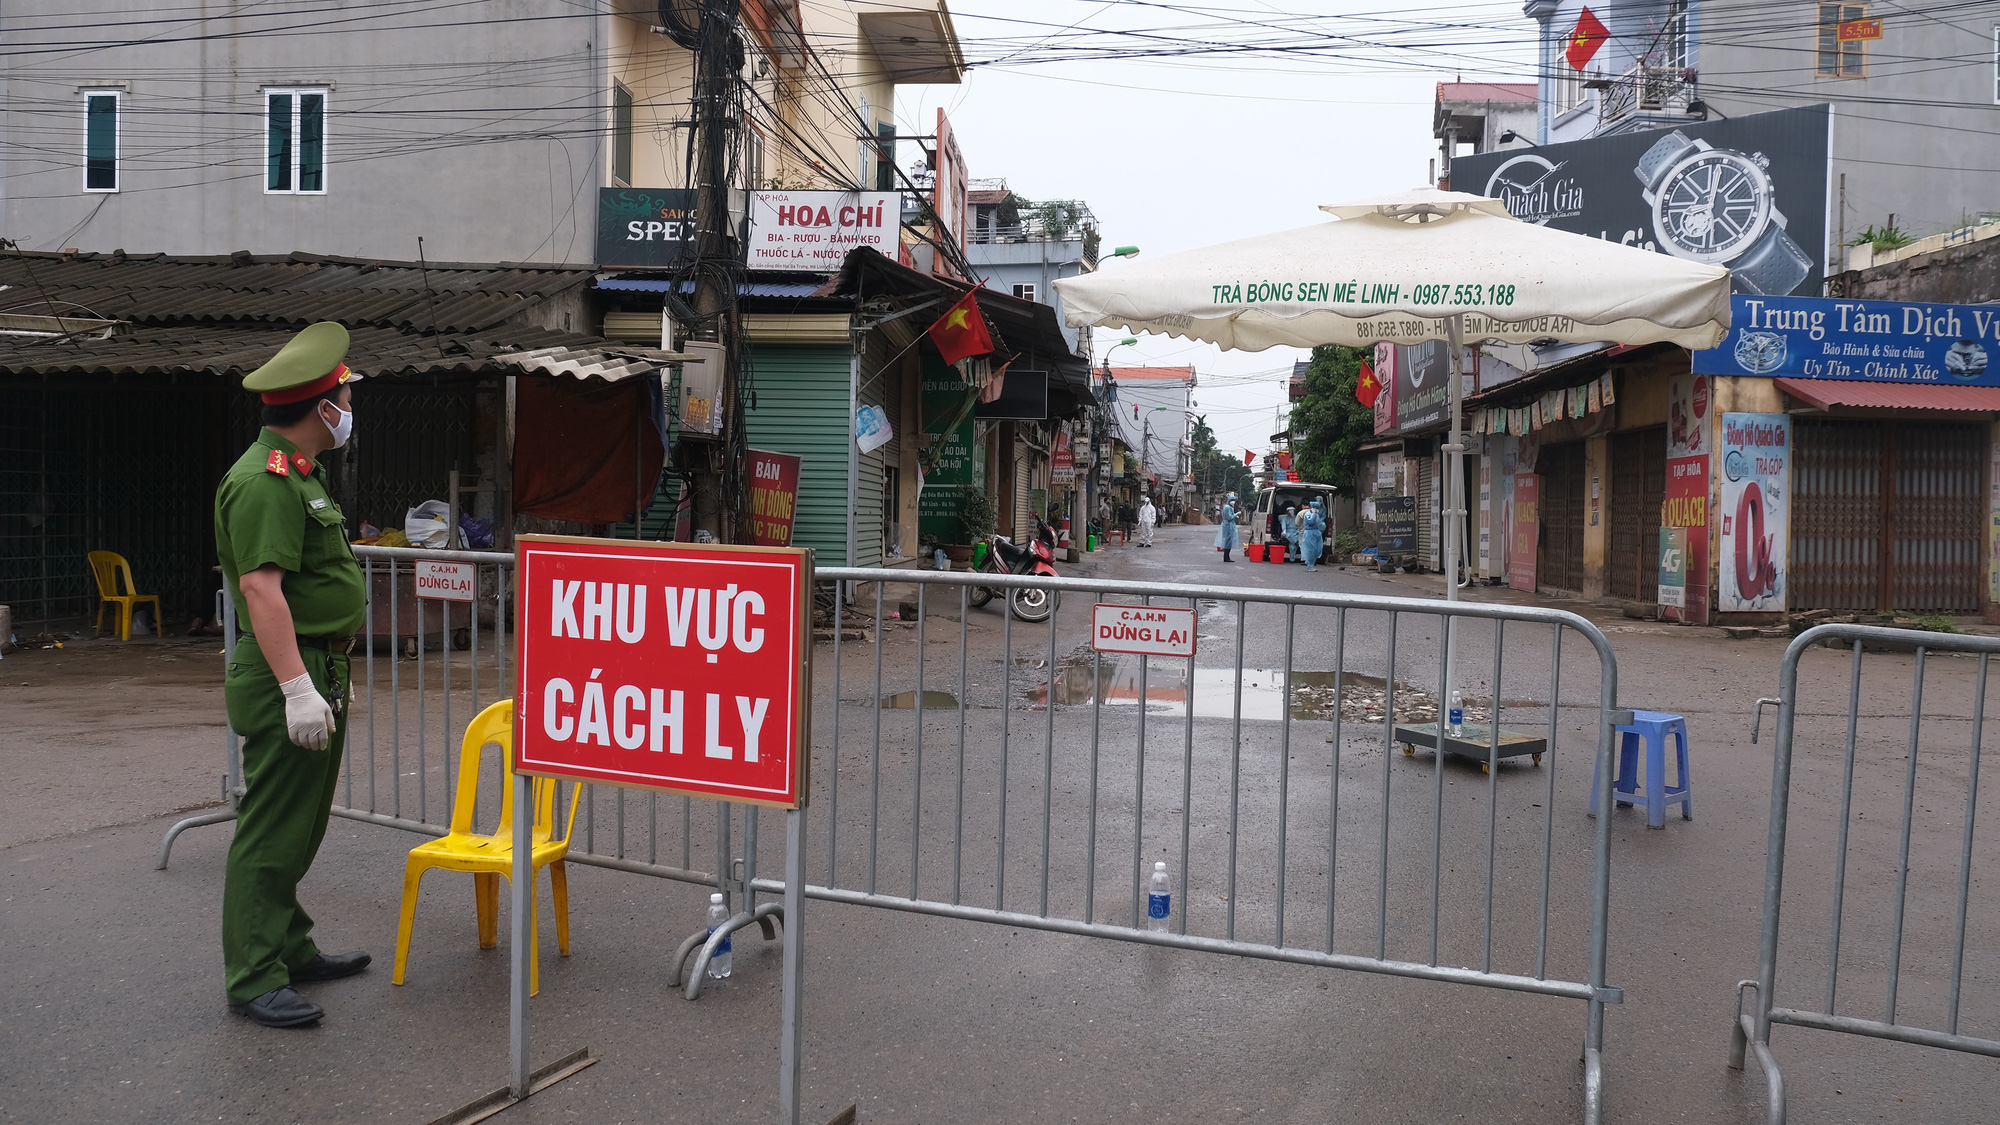 Hanoi locks down village of over 10,000 people where COVID-19 patient resides